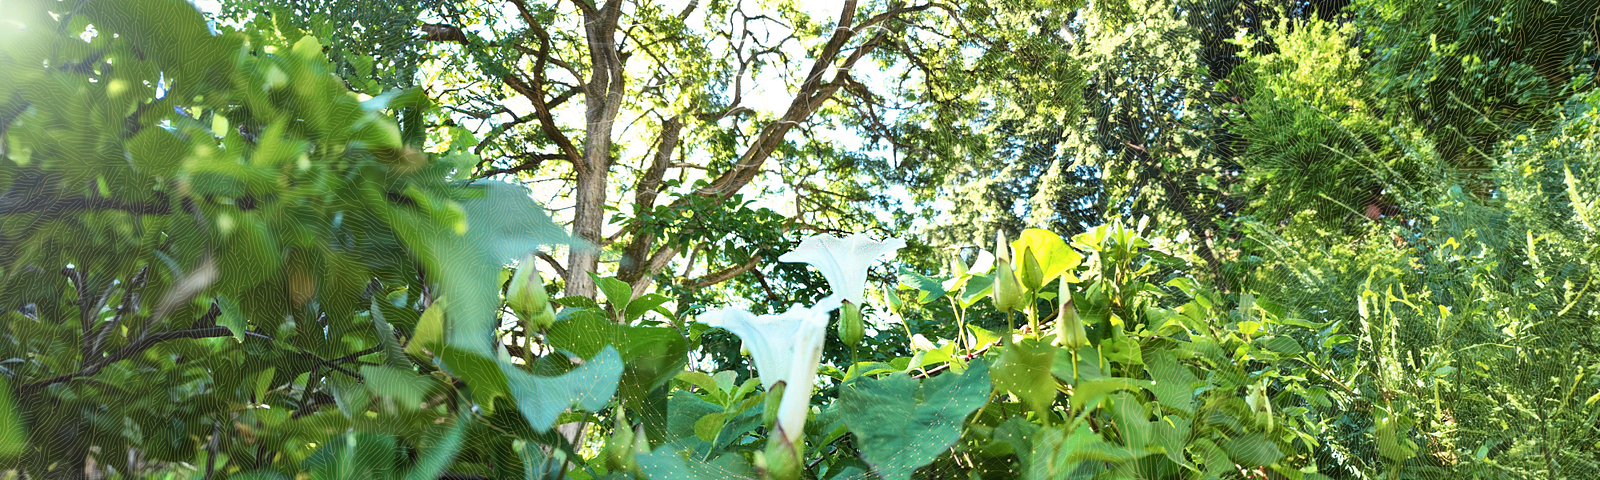 Morning Glories, Ivy, and Black Locust trees in our garden make for a green oasis.